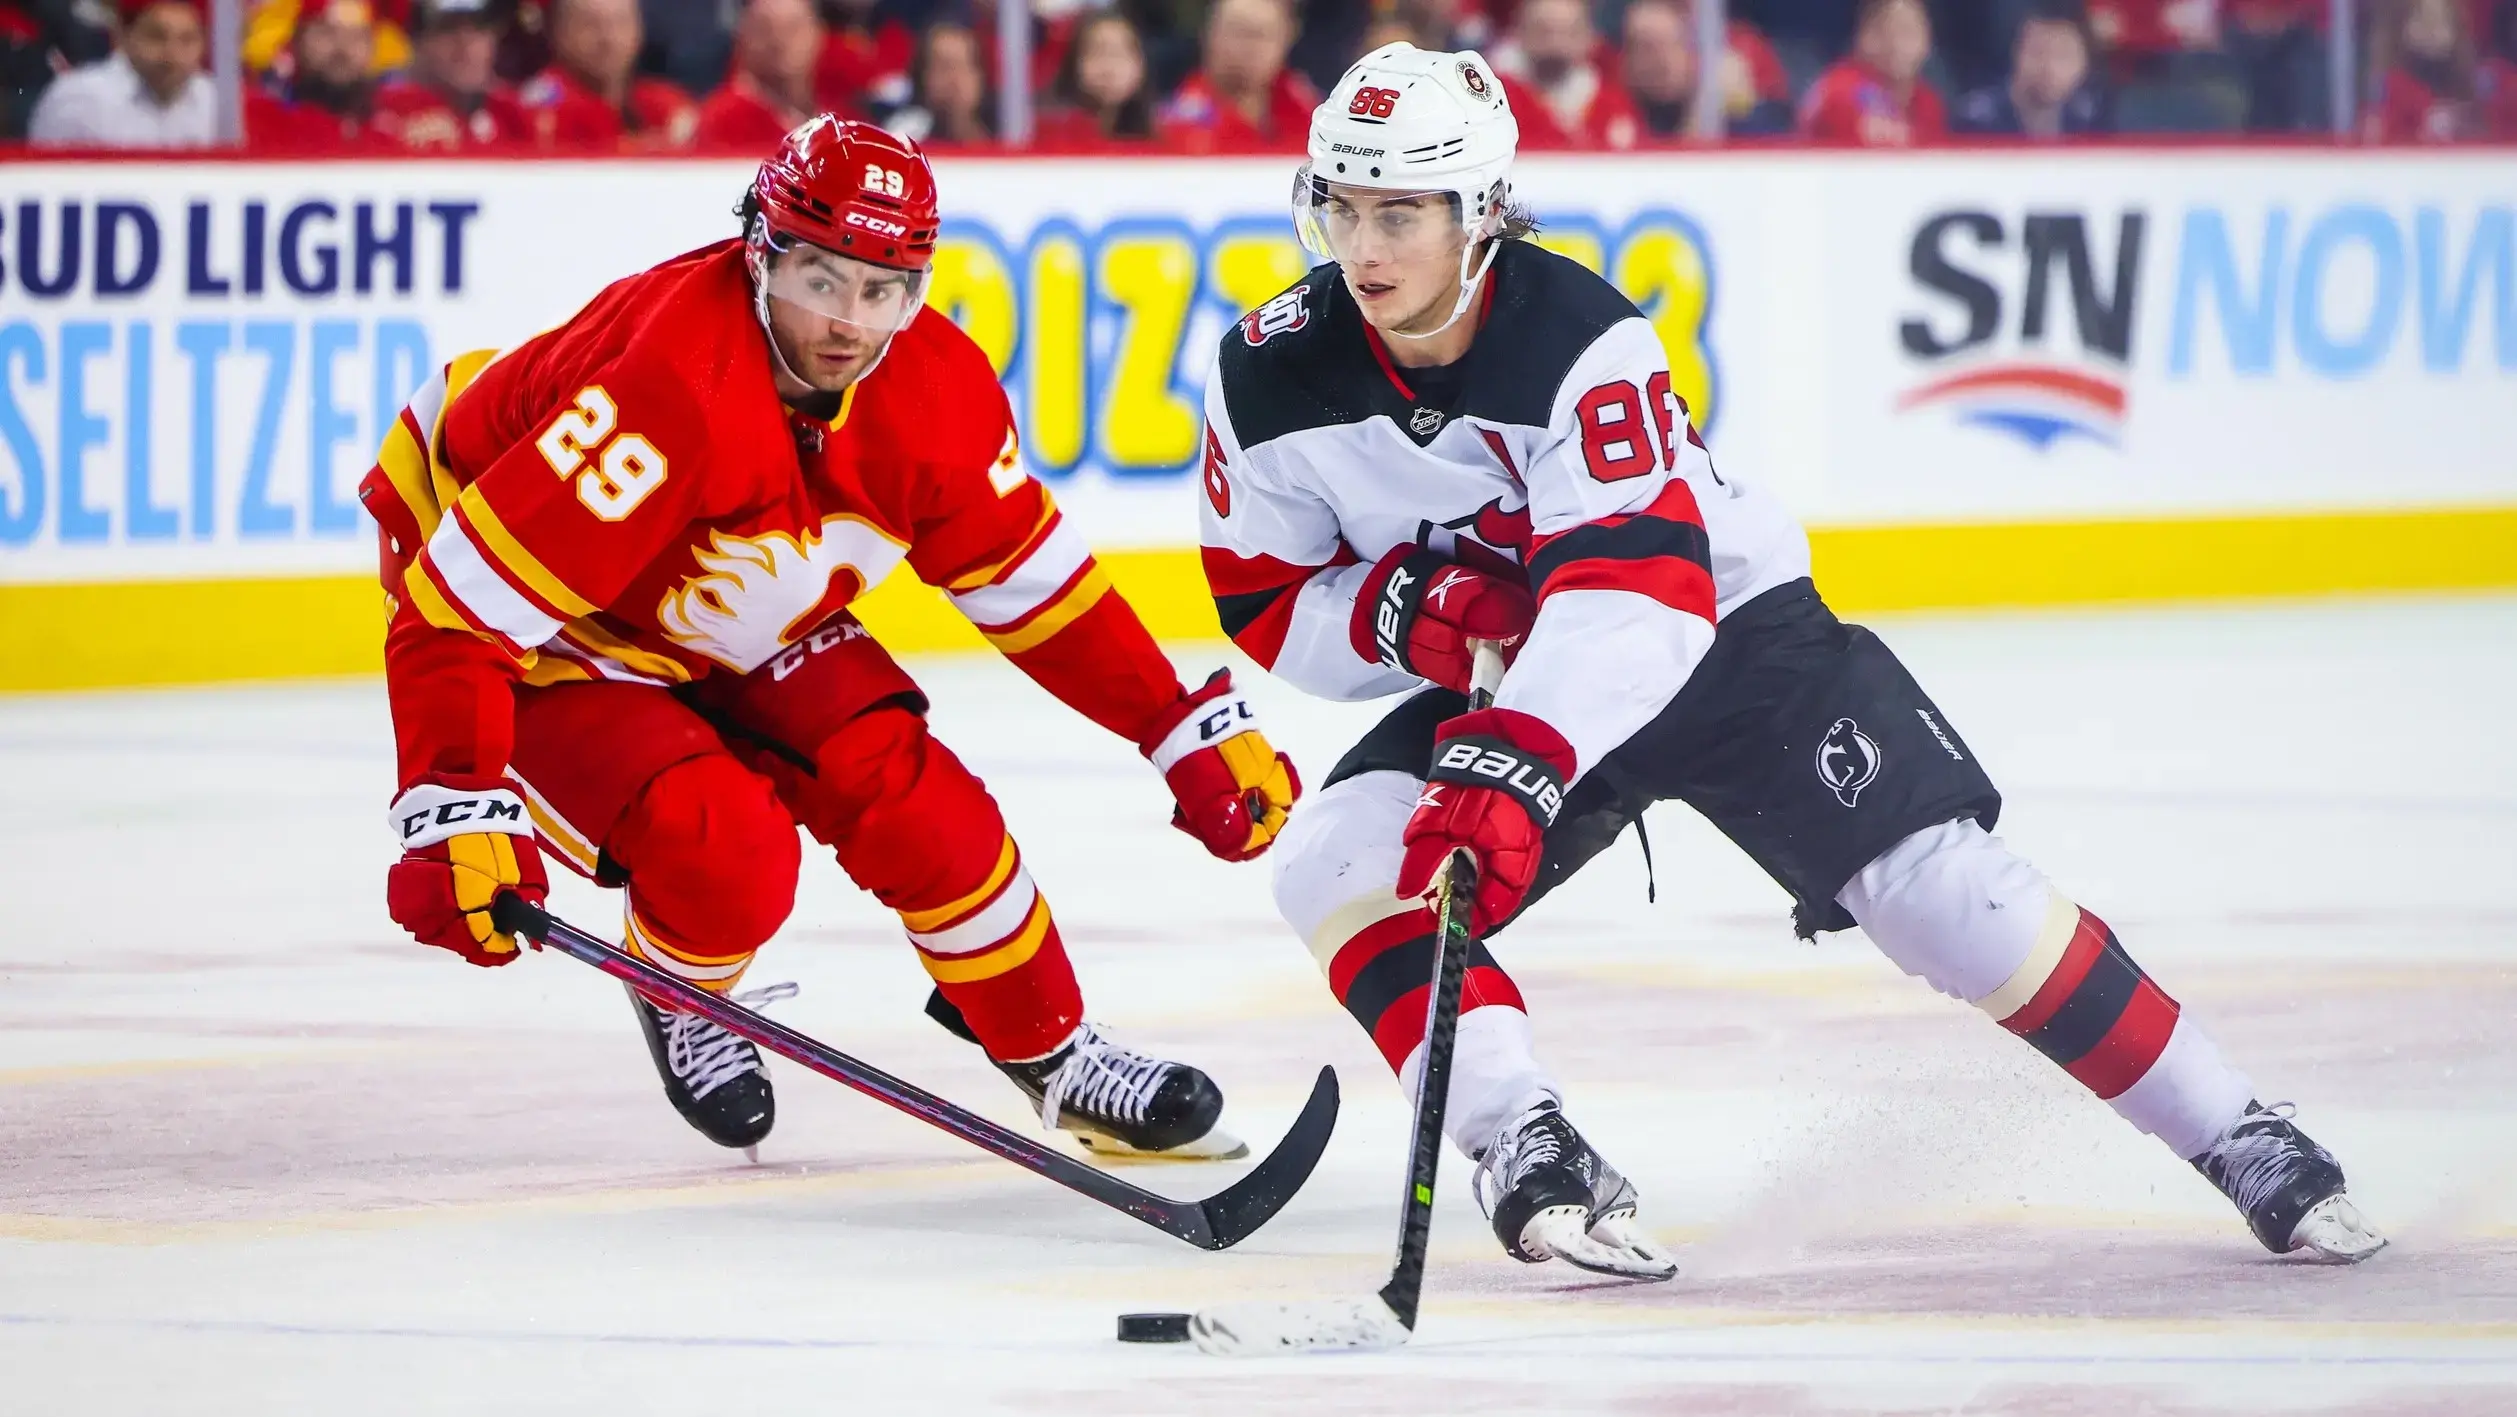 Nov 5, 2022; Calgary, Alberta, CAN; New Jersey Devils center Jack Hughes (86) controls the puck against Calgary Flames center Dillon Dube (29) during the third period at Scotiabank Saddledome. / Sergei Belski-USA TODAY Sports